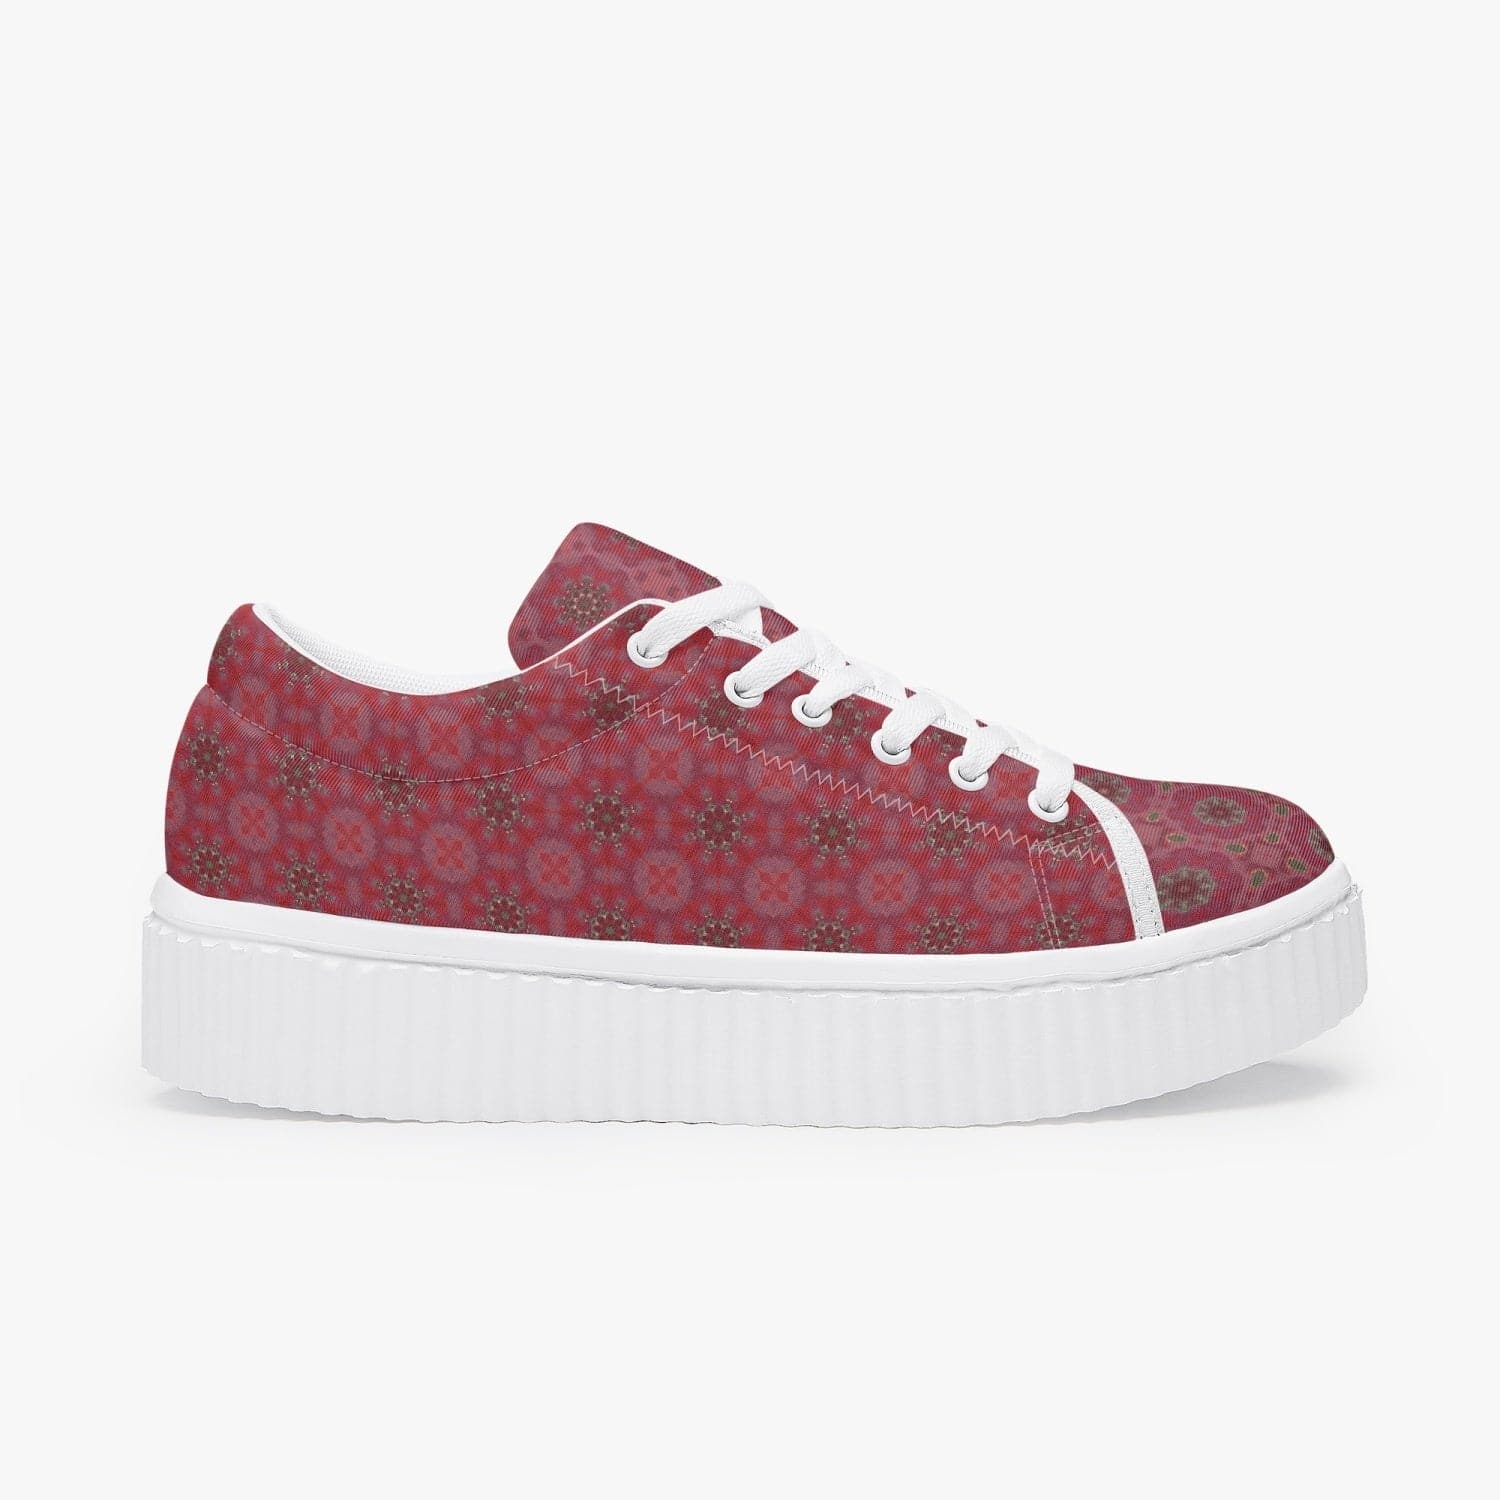 Red Wine rosy patterned Stylish Women’s Low Top Mesh Platform Sneakers, by Sensus Studio Design